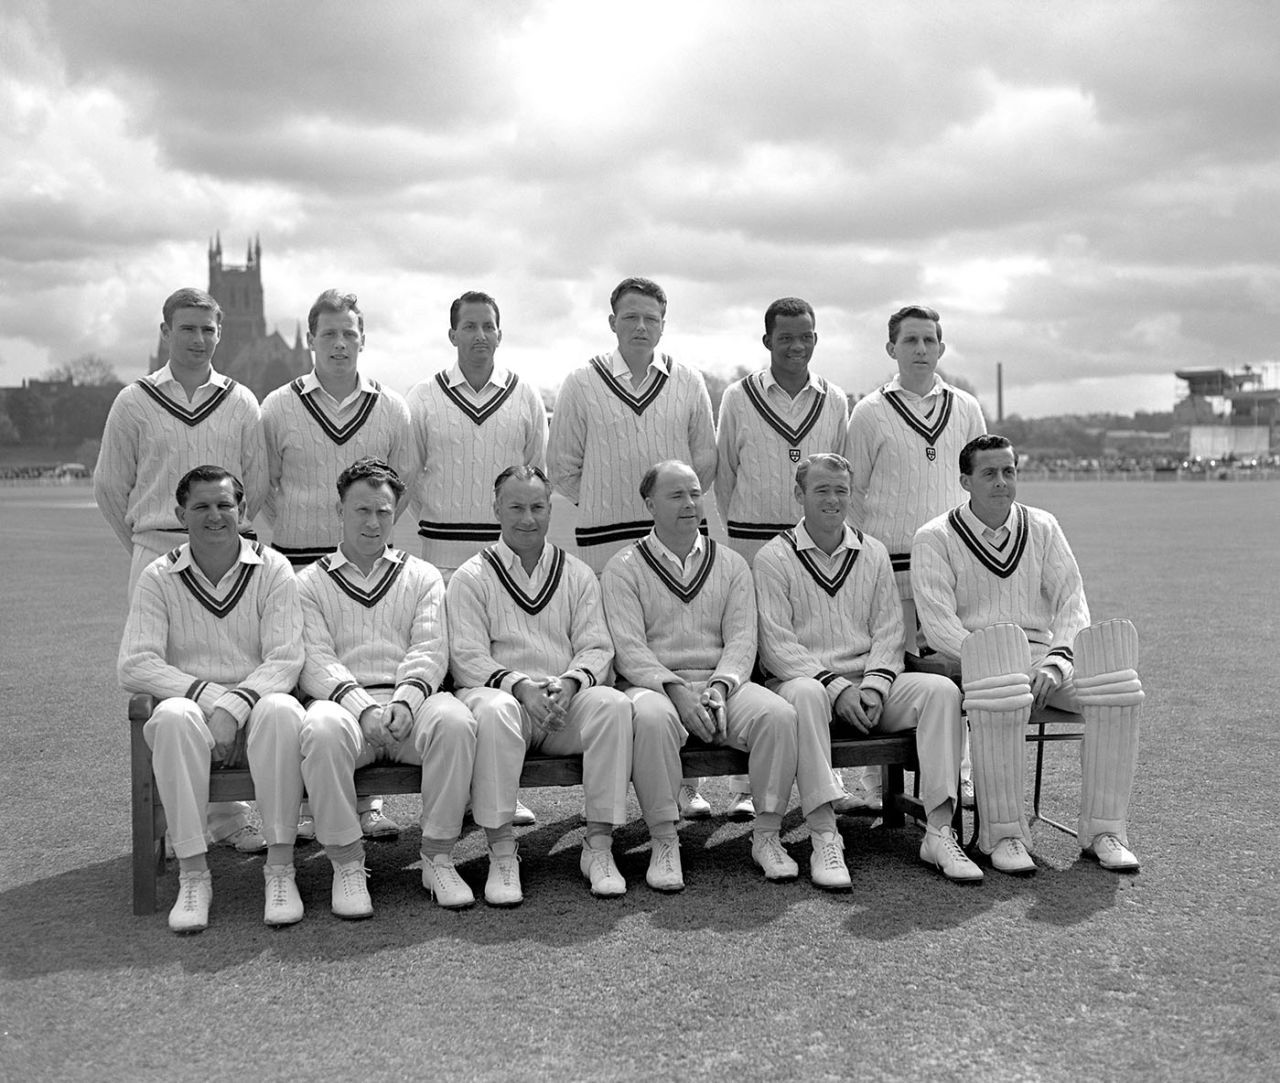 The Worcestershire team of 1964: Tom Graveney sits front left, Basil D'Oliveira is back row third from left, New Road, April 29, 1964